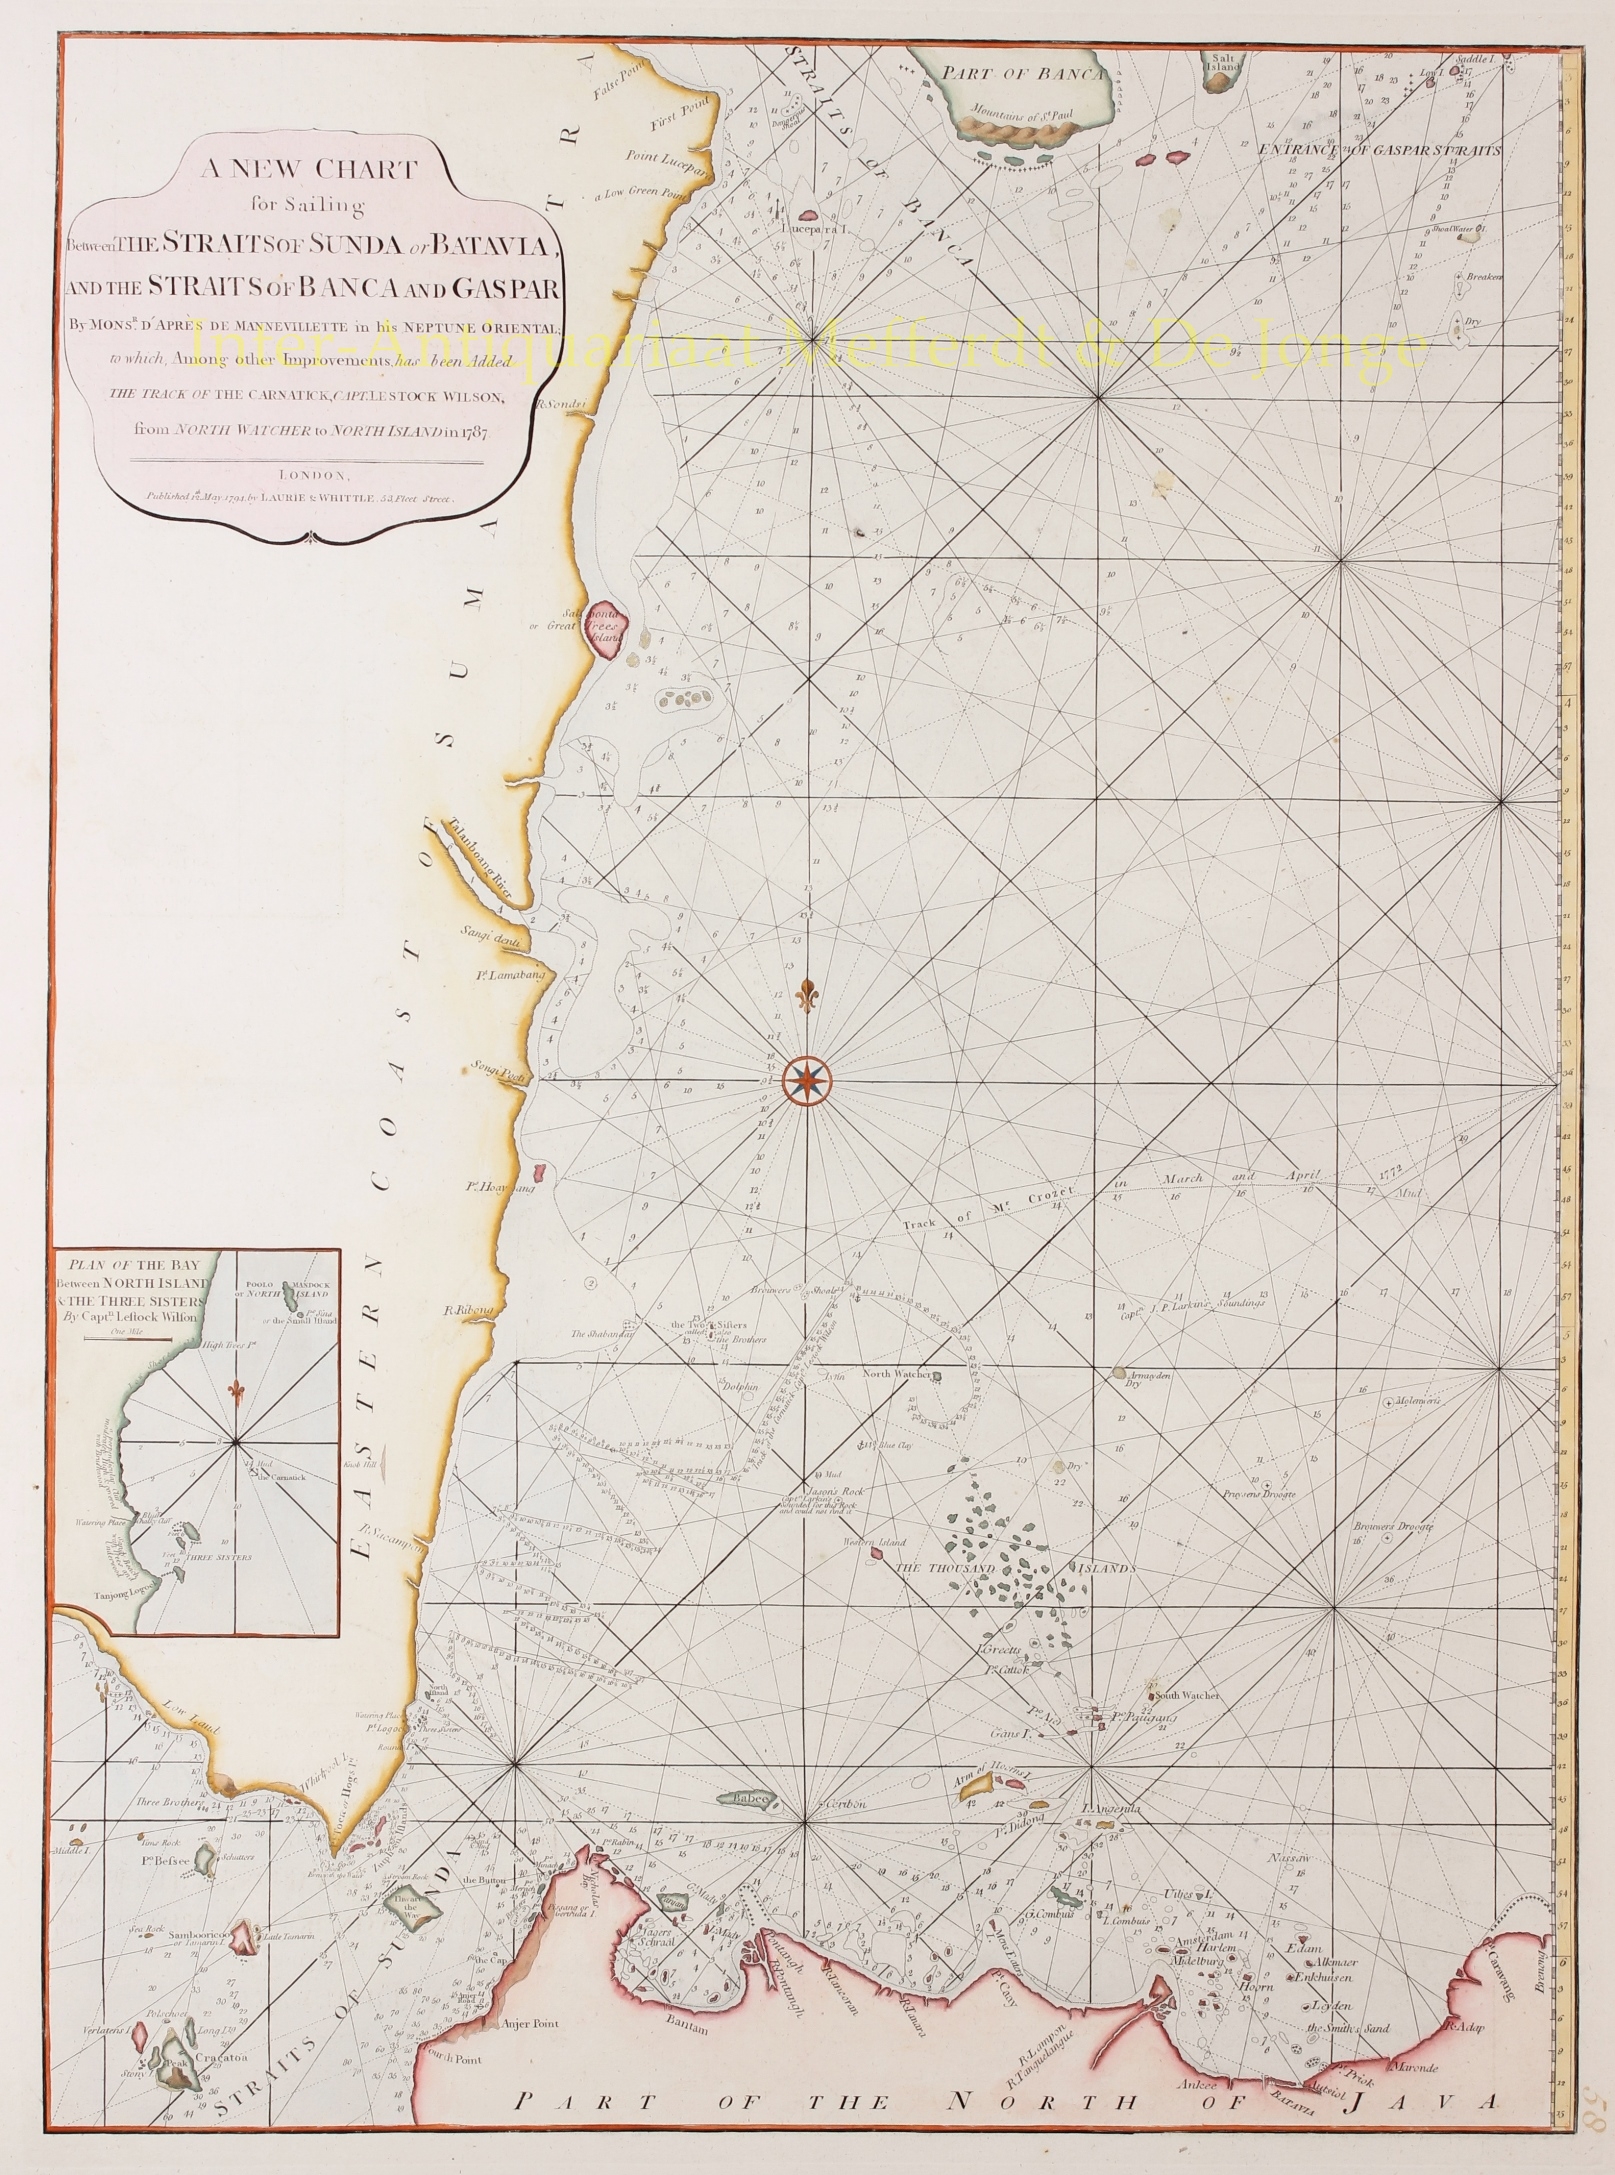 Laurie and Whittle - Indonesia, Strait of Sunda or Batavia - Laurie and Whittle, 1794